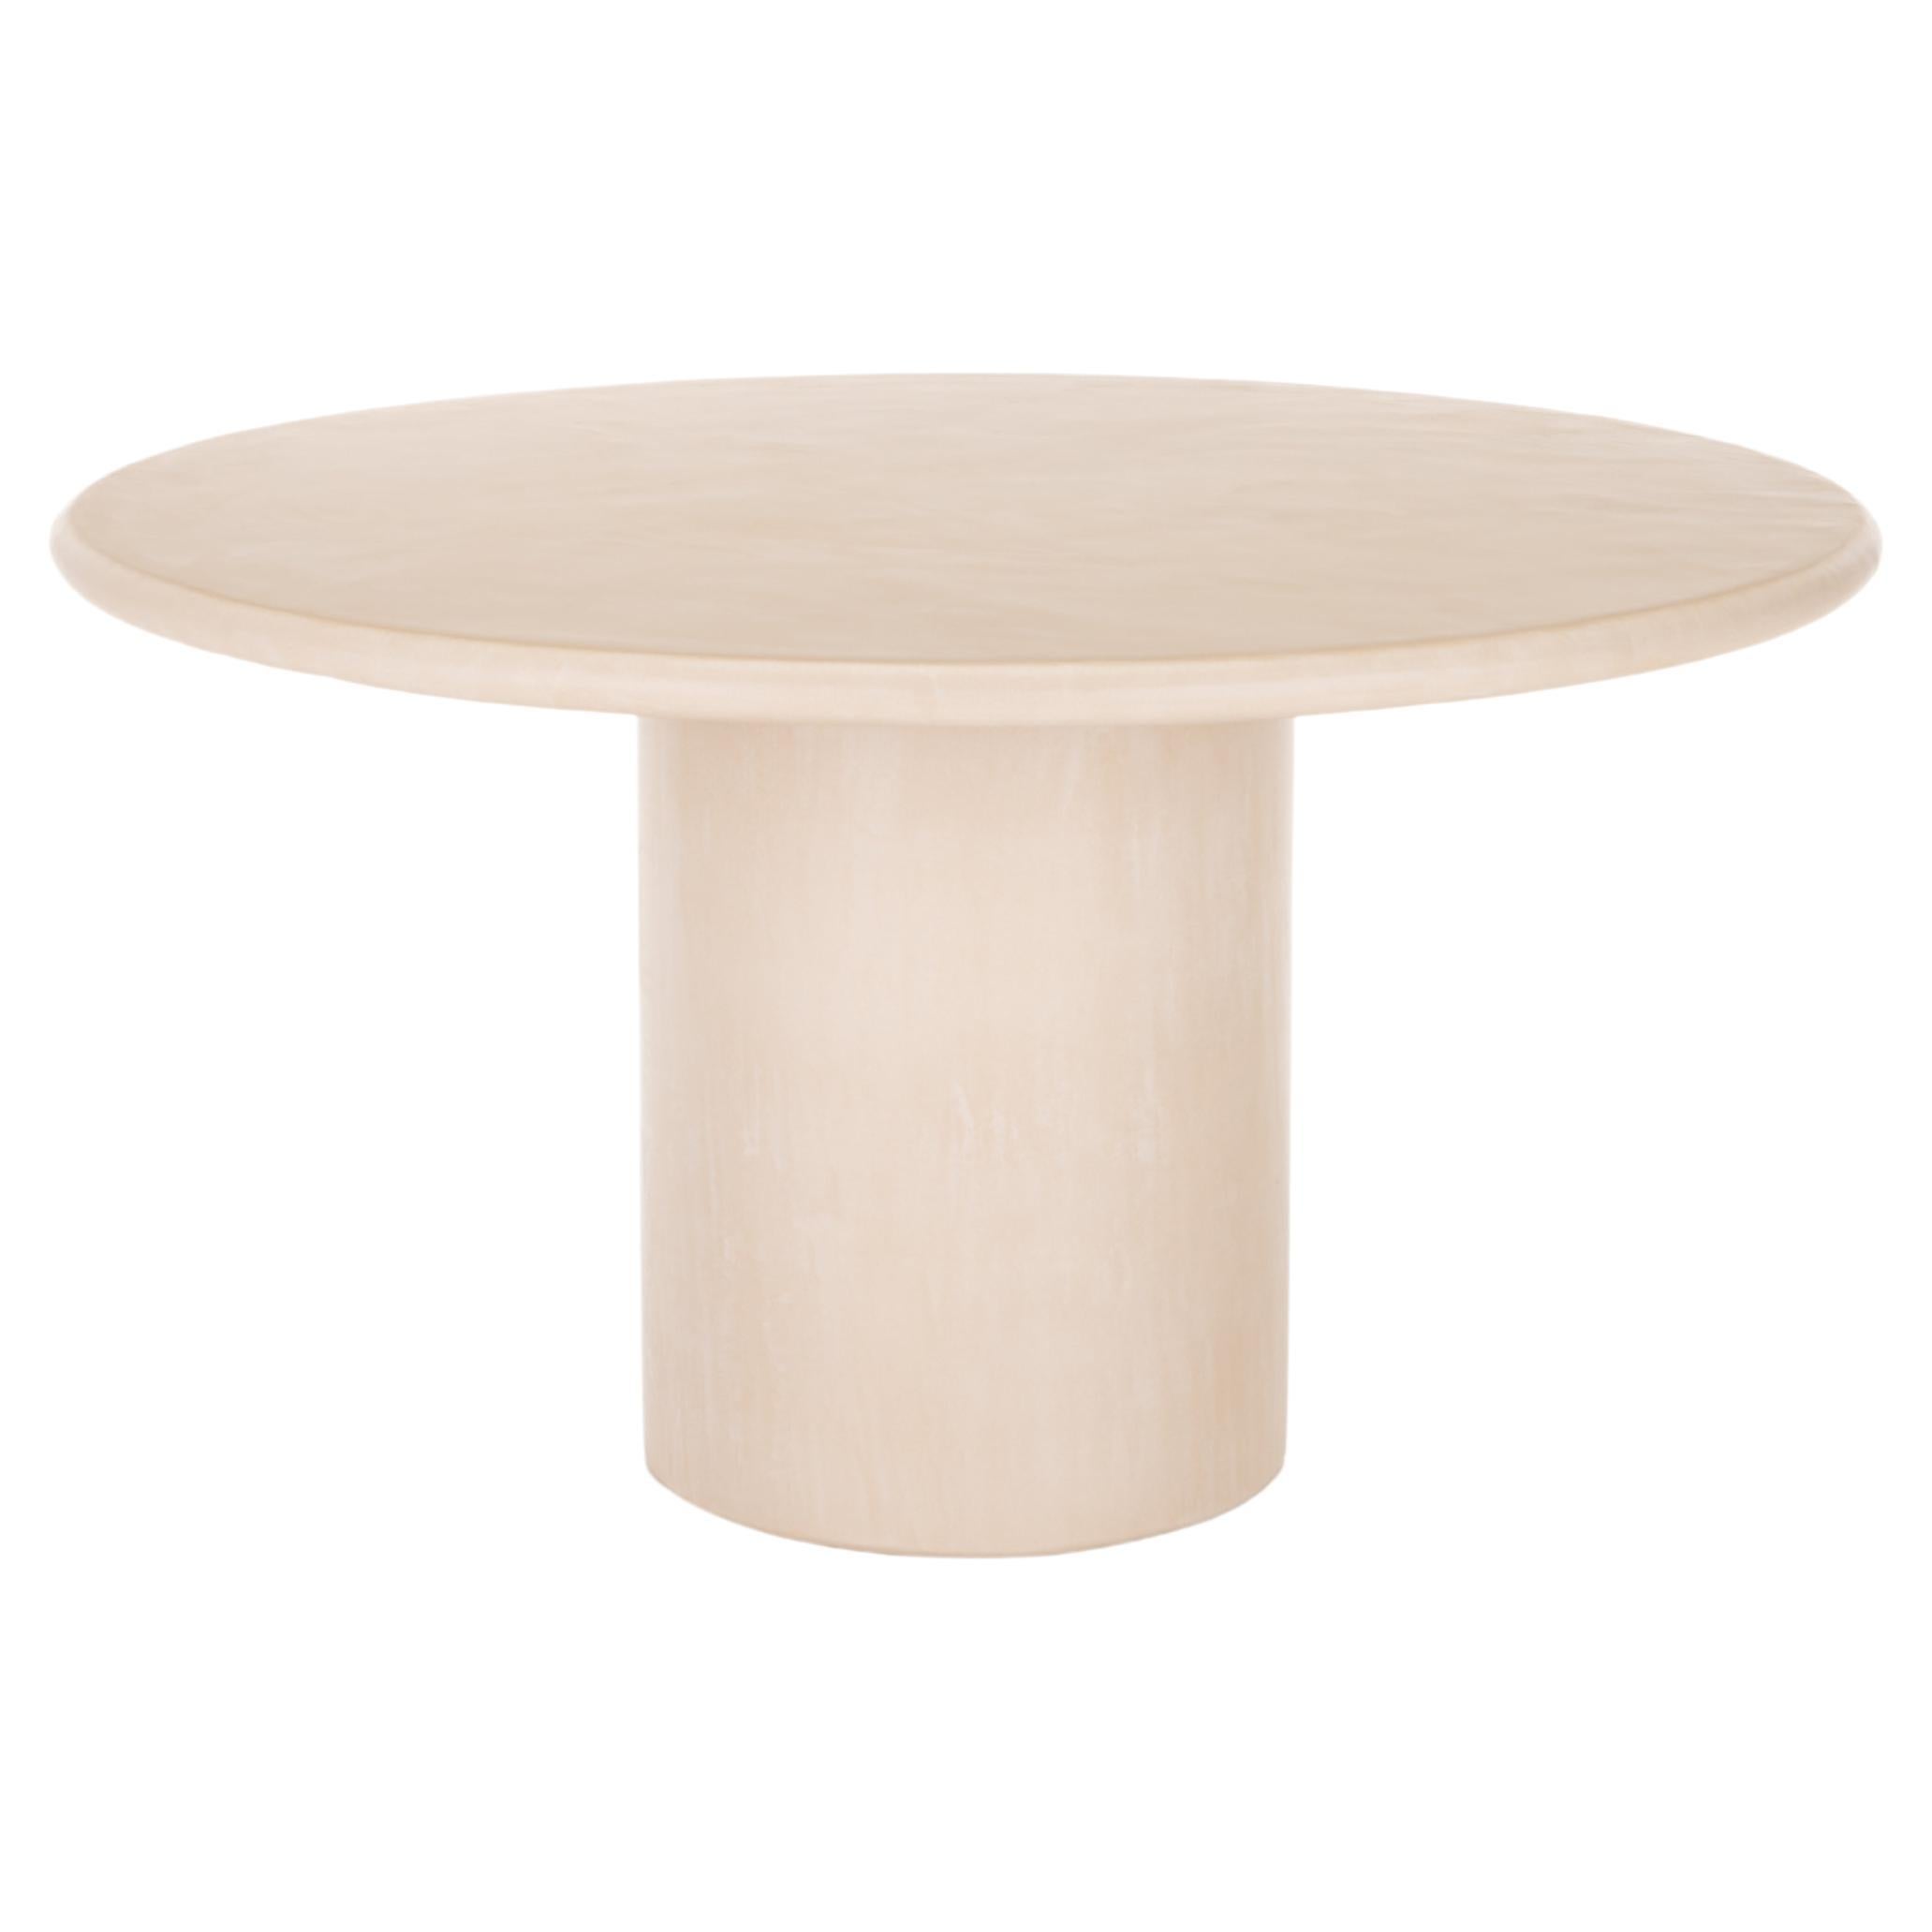 Round Natural Plaster Dining Table "Column" 120 by Isabelle Beaumont